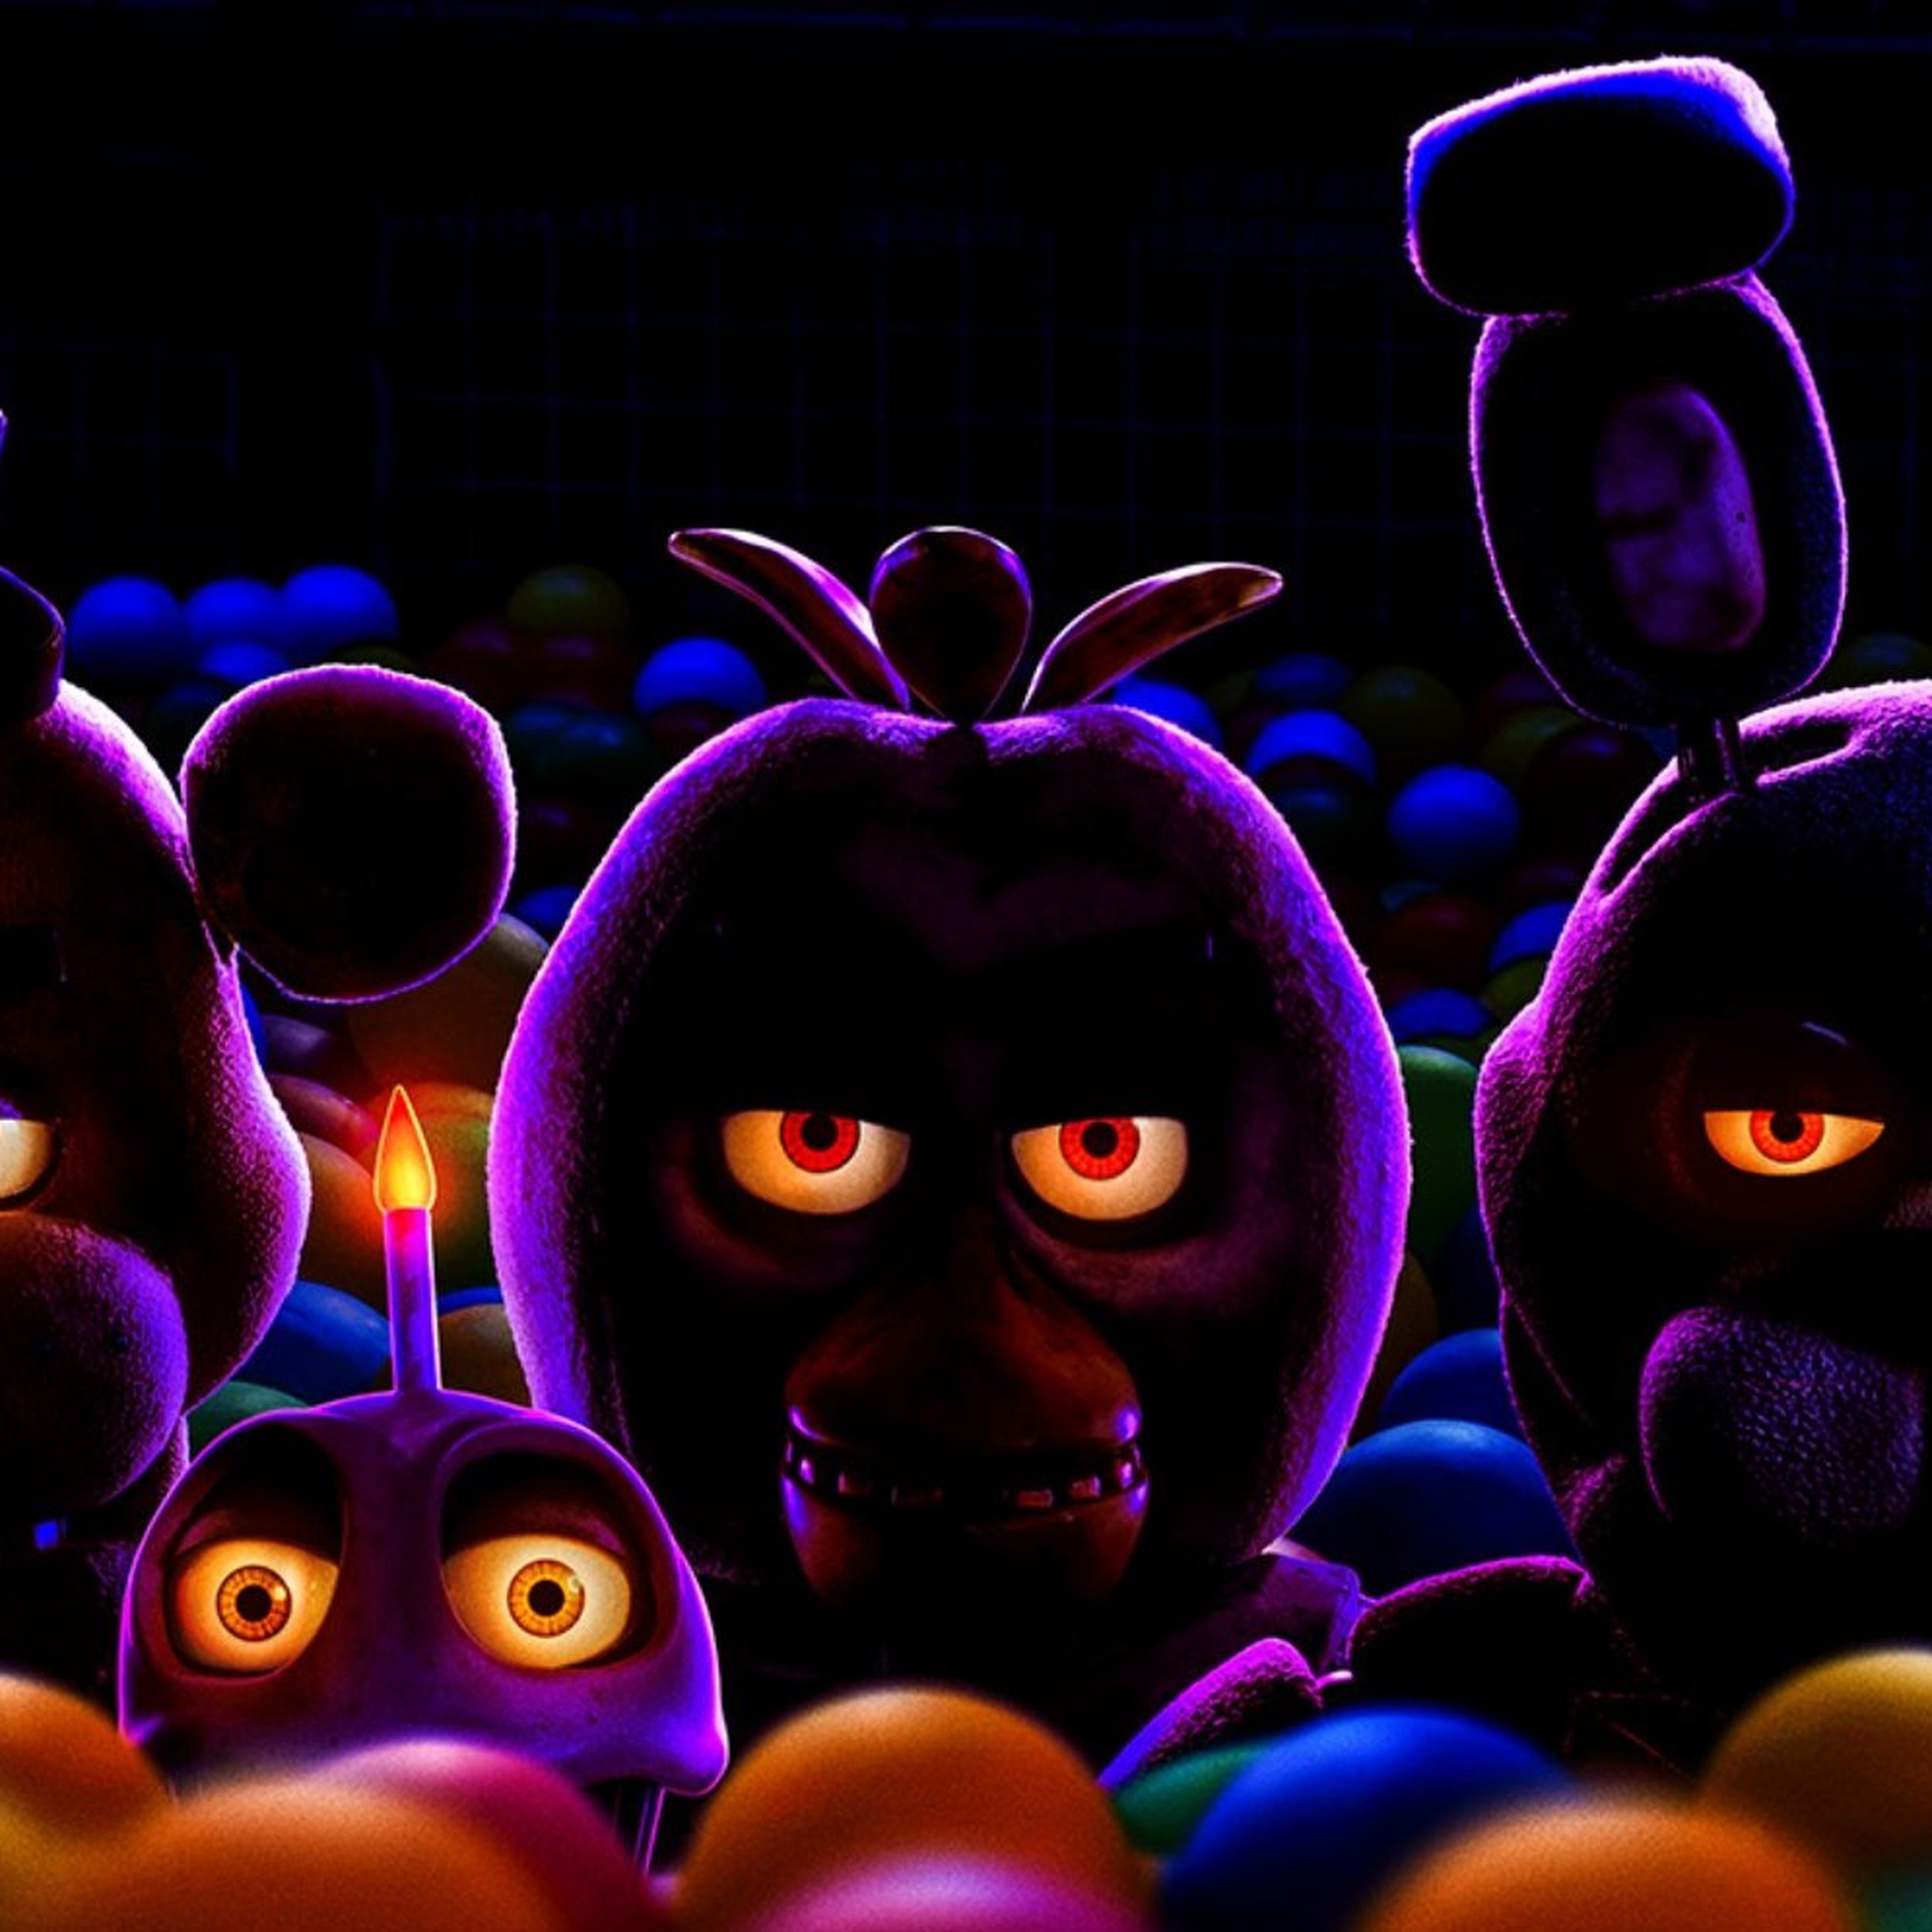 Five Nights at Freddy's Creator Responds to Movie Success